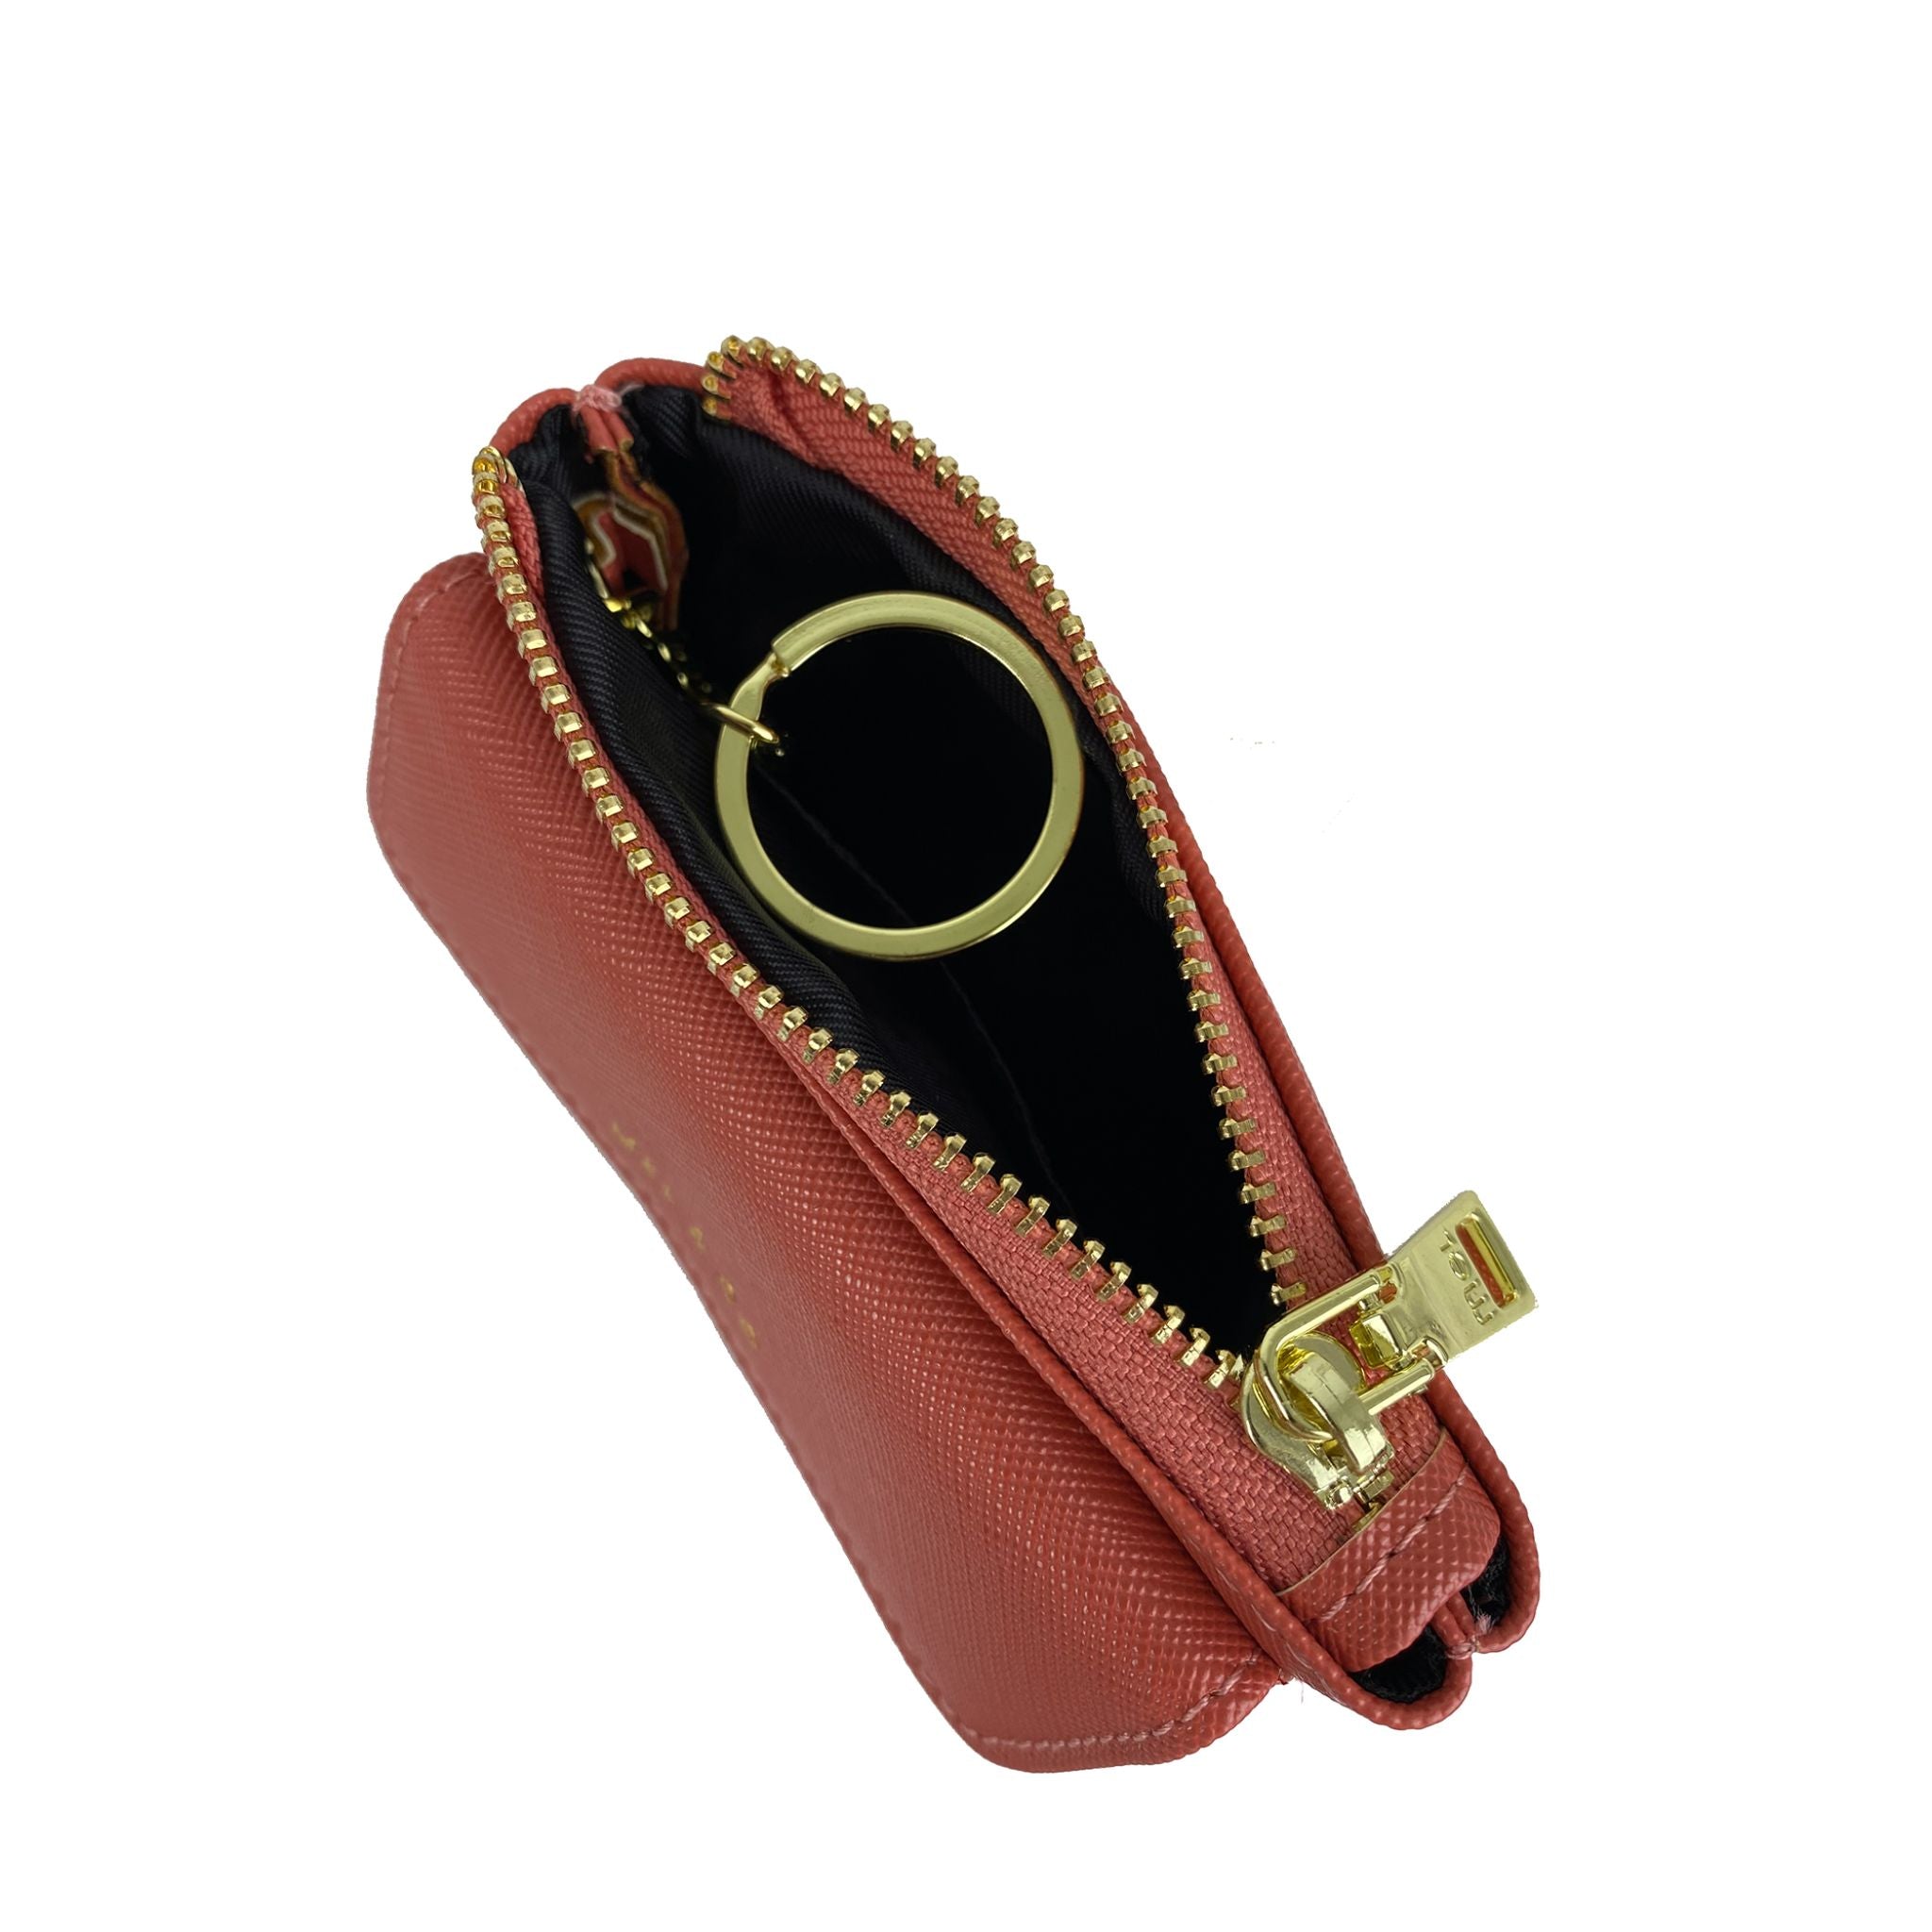 Mel&Co Saffiano-Effect Front Flap Pocket Pouch with Keyring Coral